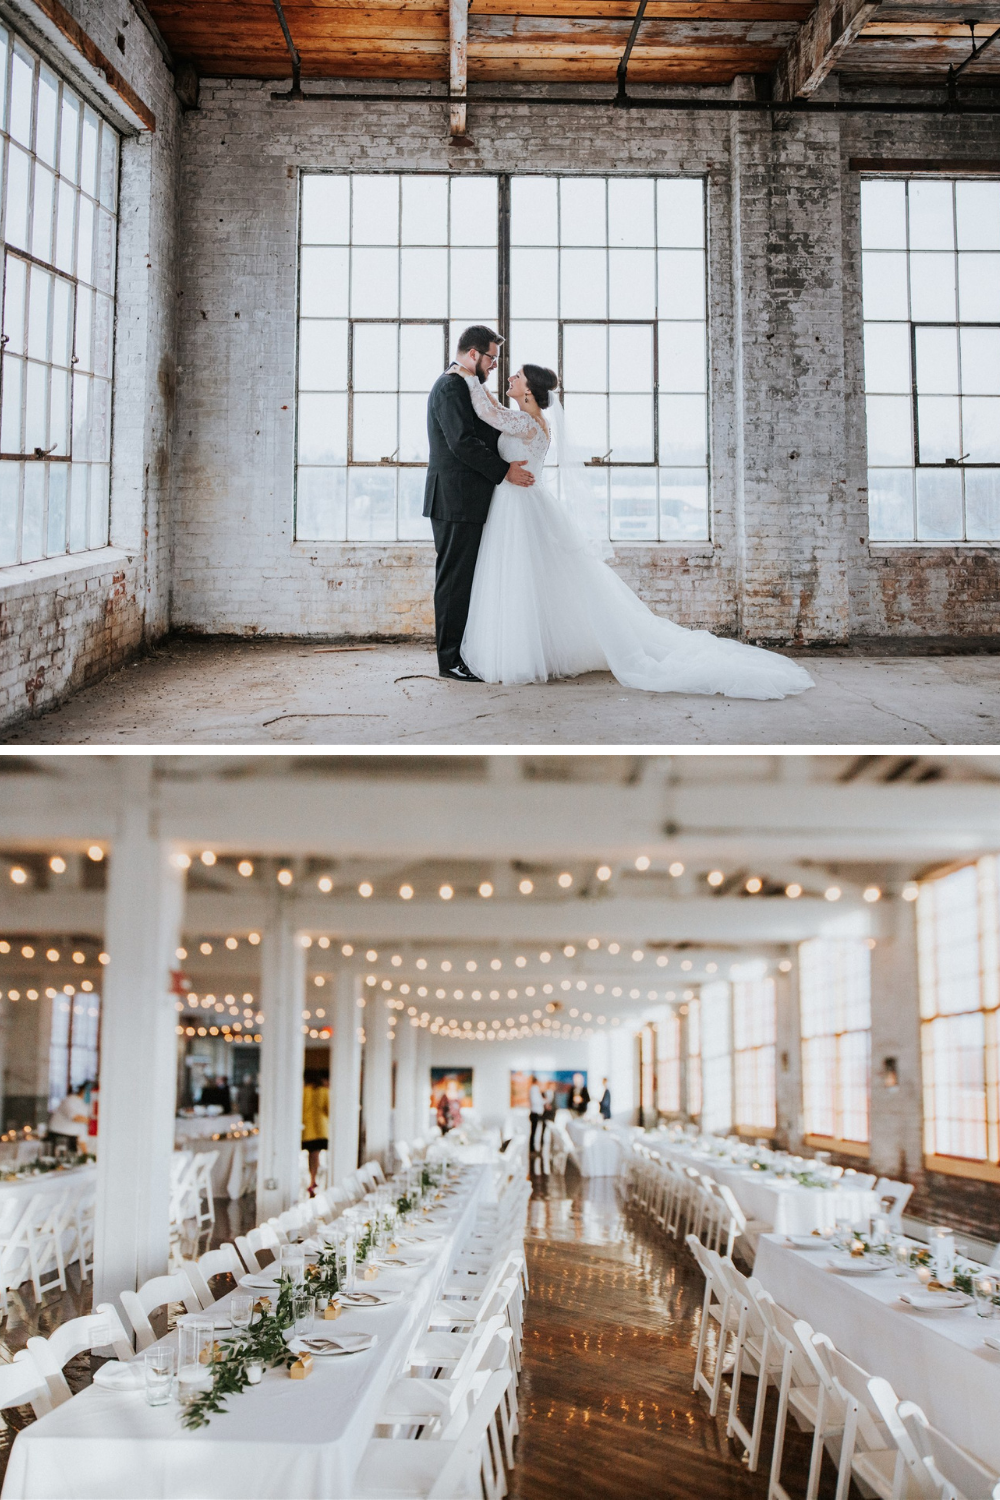 Real weddings at The Cracker Factory Wedding venue